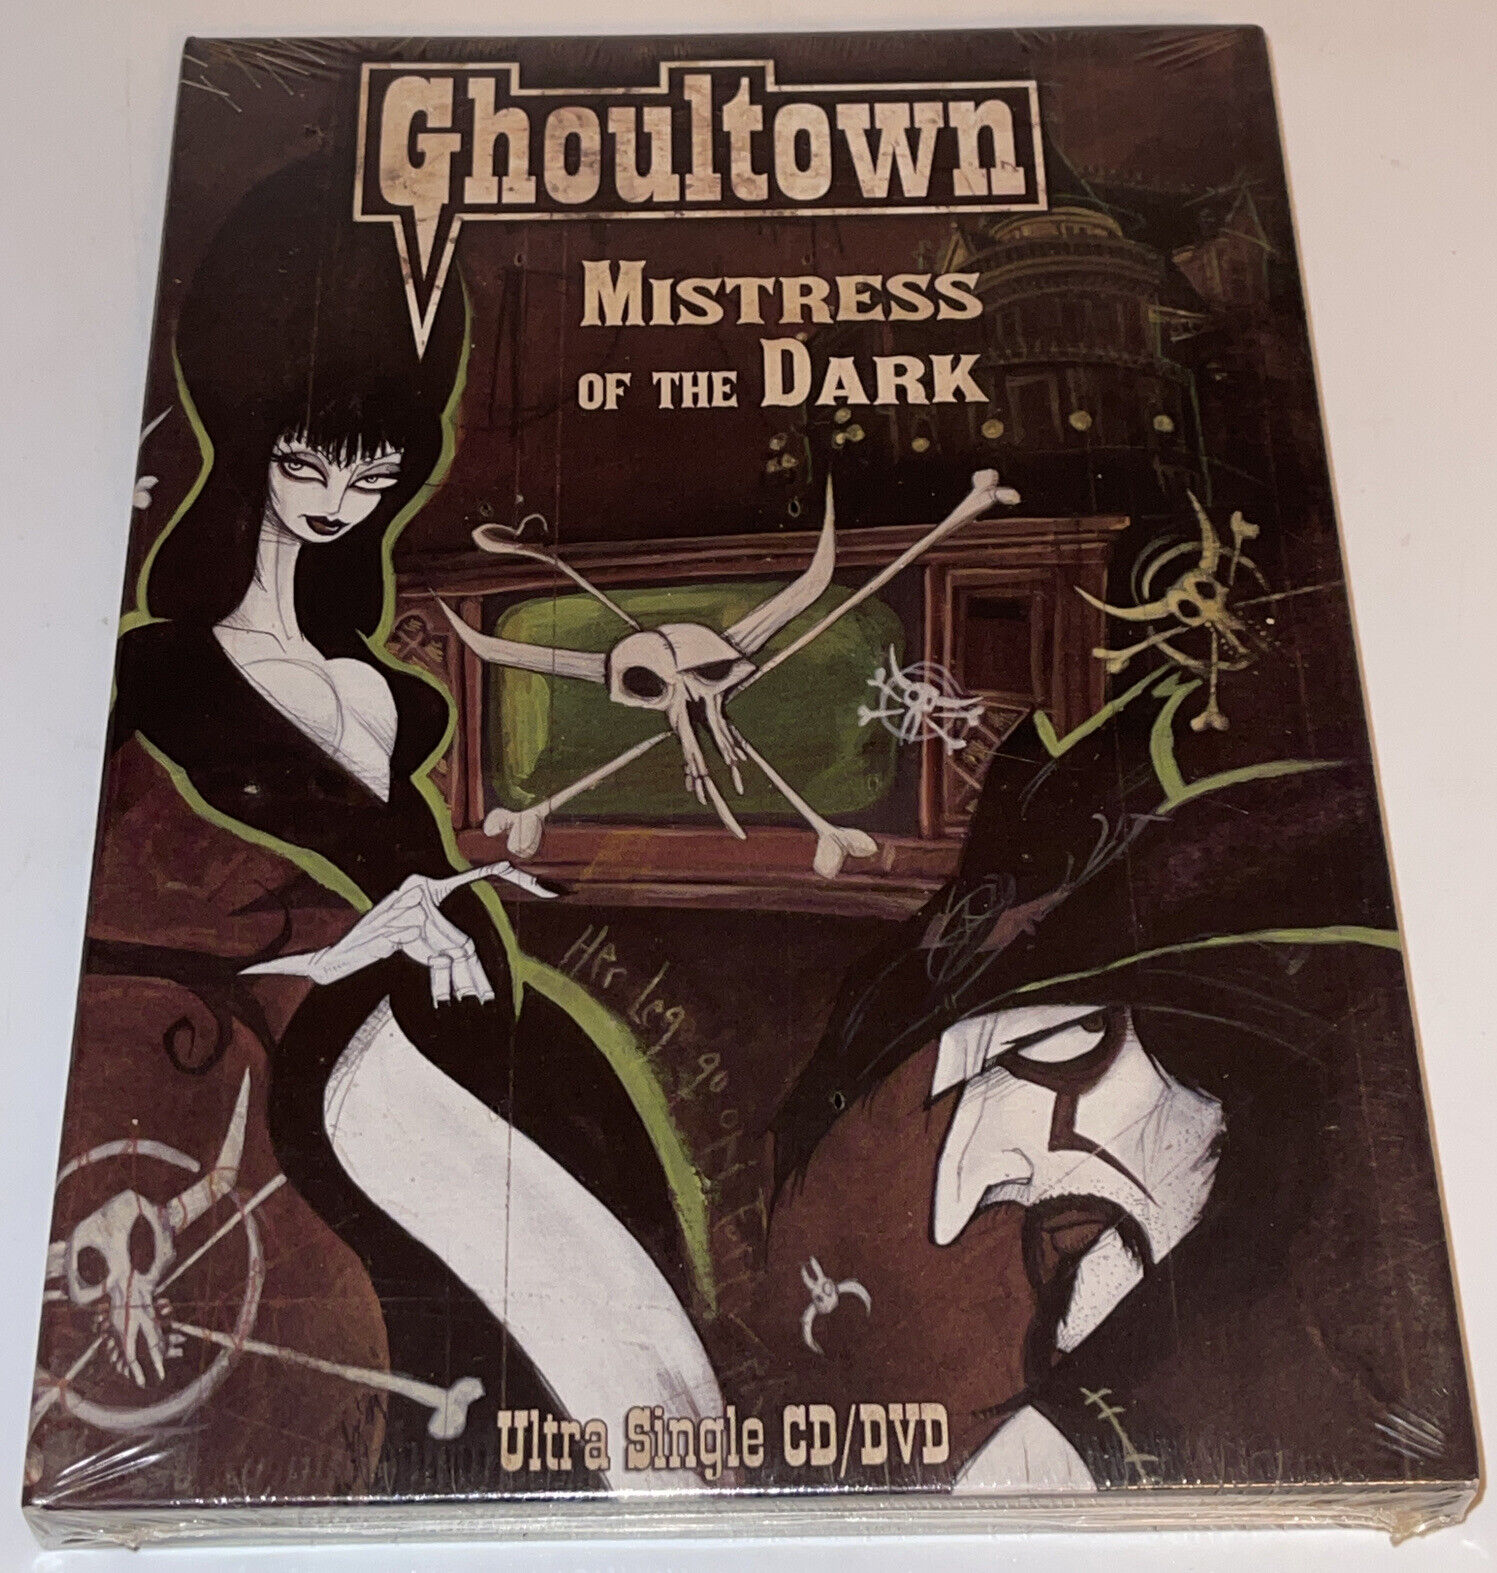 Mistress of the Dark by Ghoultown (CD/DVD, 2009) Elvira - Limited 2000 Copies